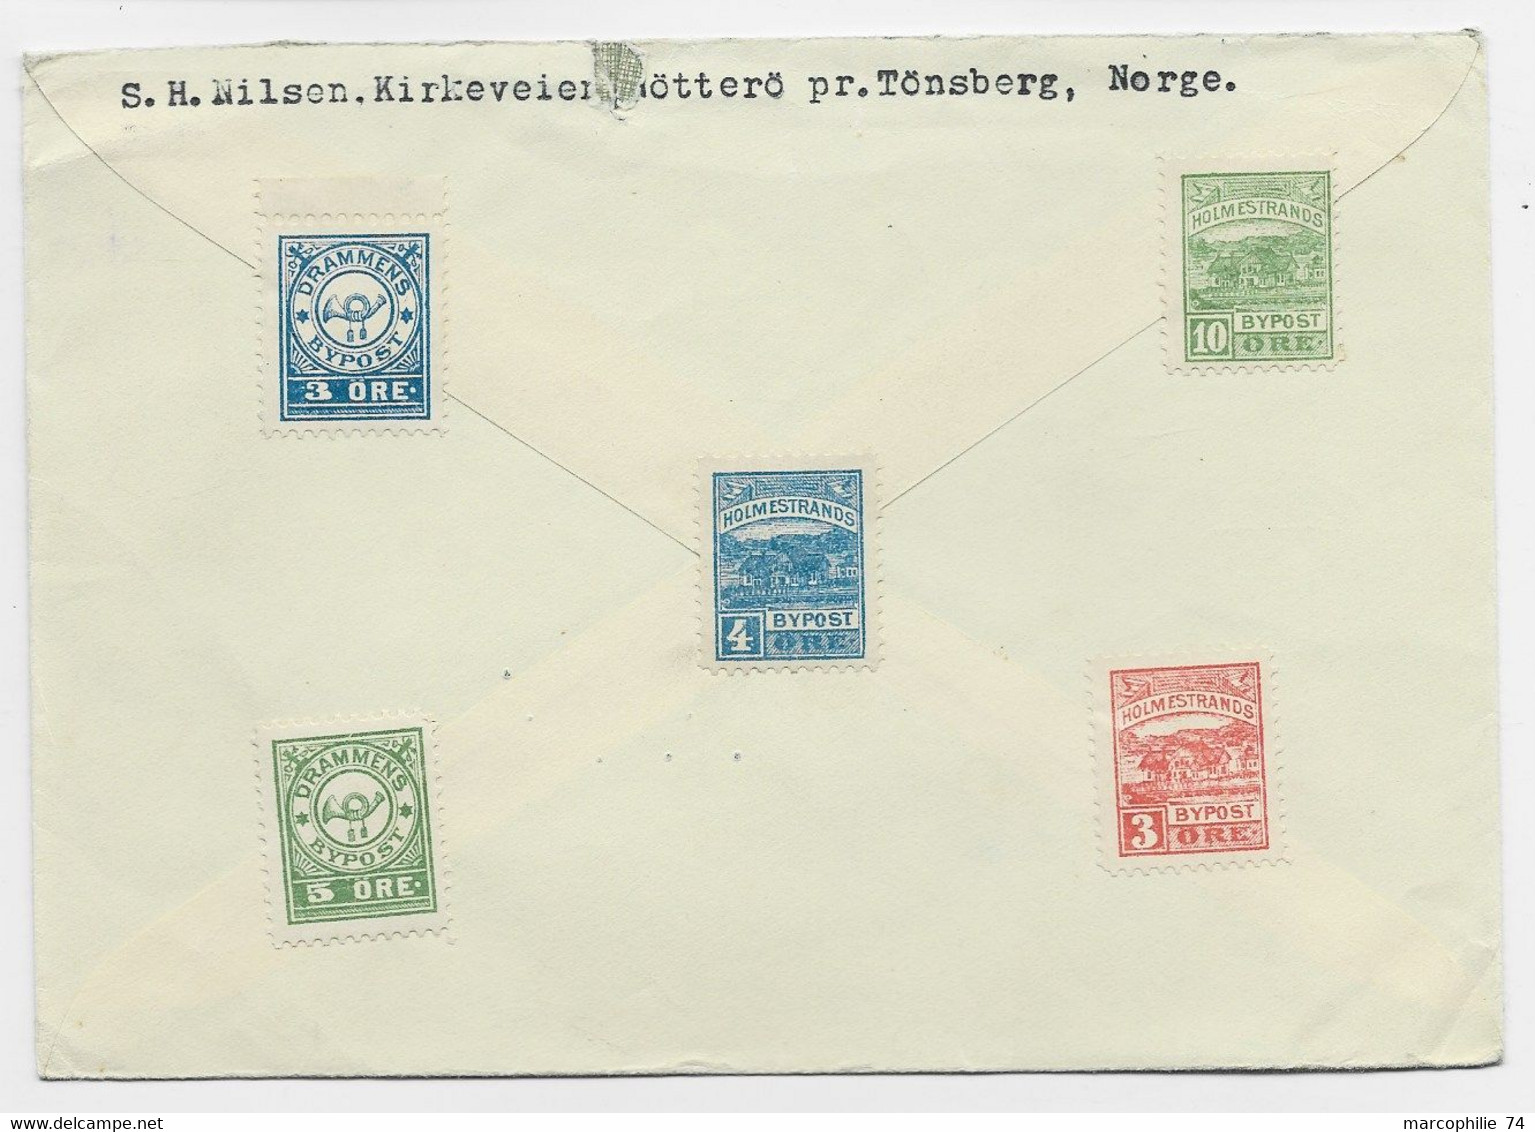 NORGE NORWAY LETTRE COVER TONSBERG 10.1.1955 TO USA - Cartas & Documentos